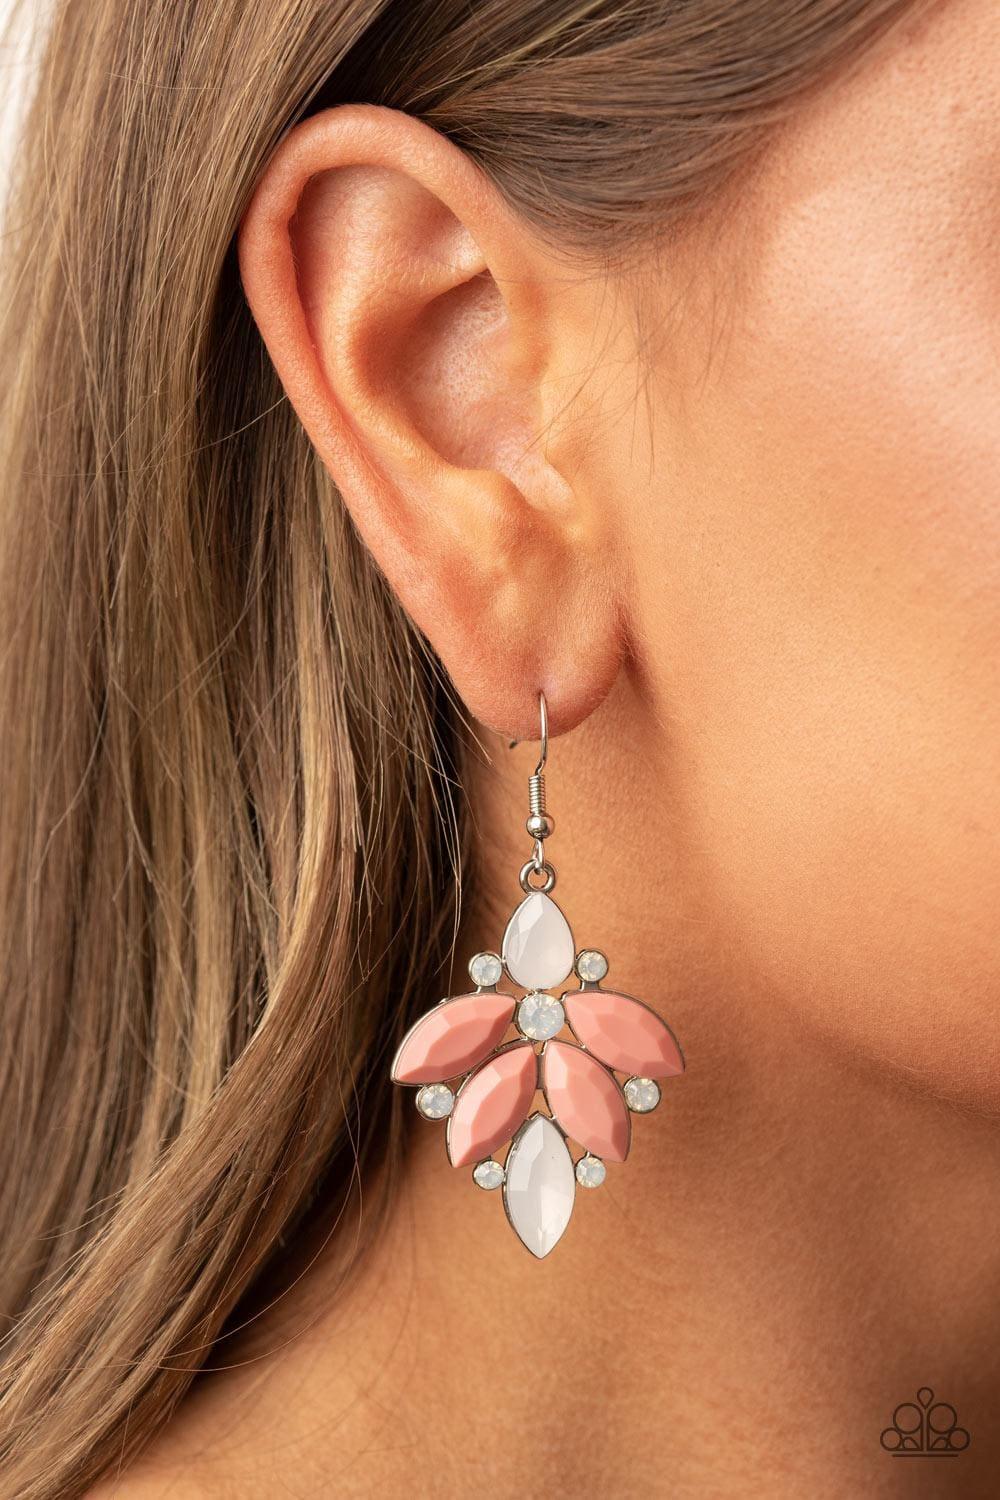 Paparazzi Accessories - Fantasy Flair - Pink Earrings - Bling by JessieK